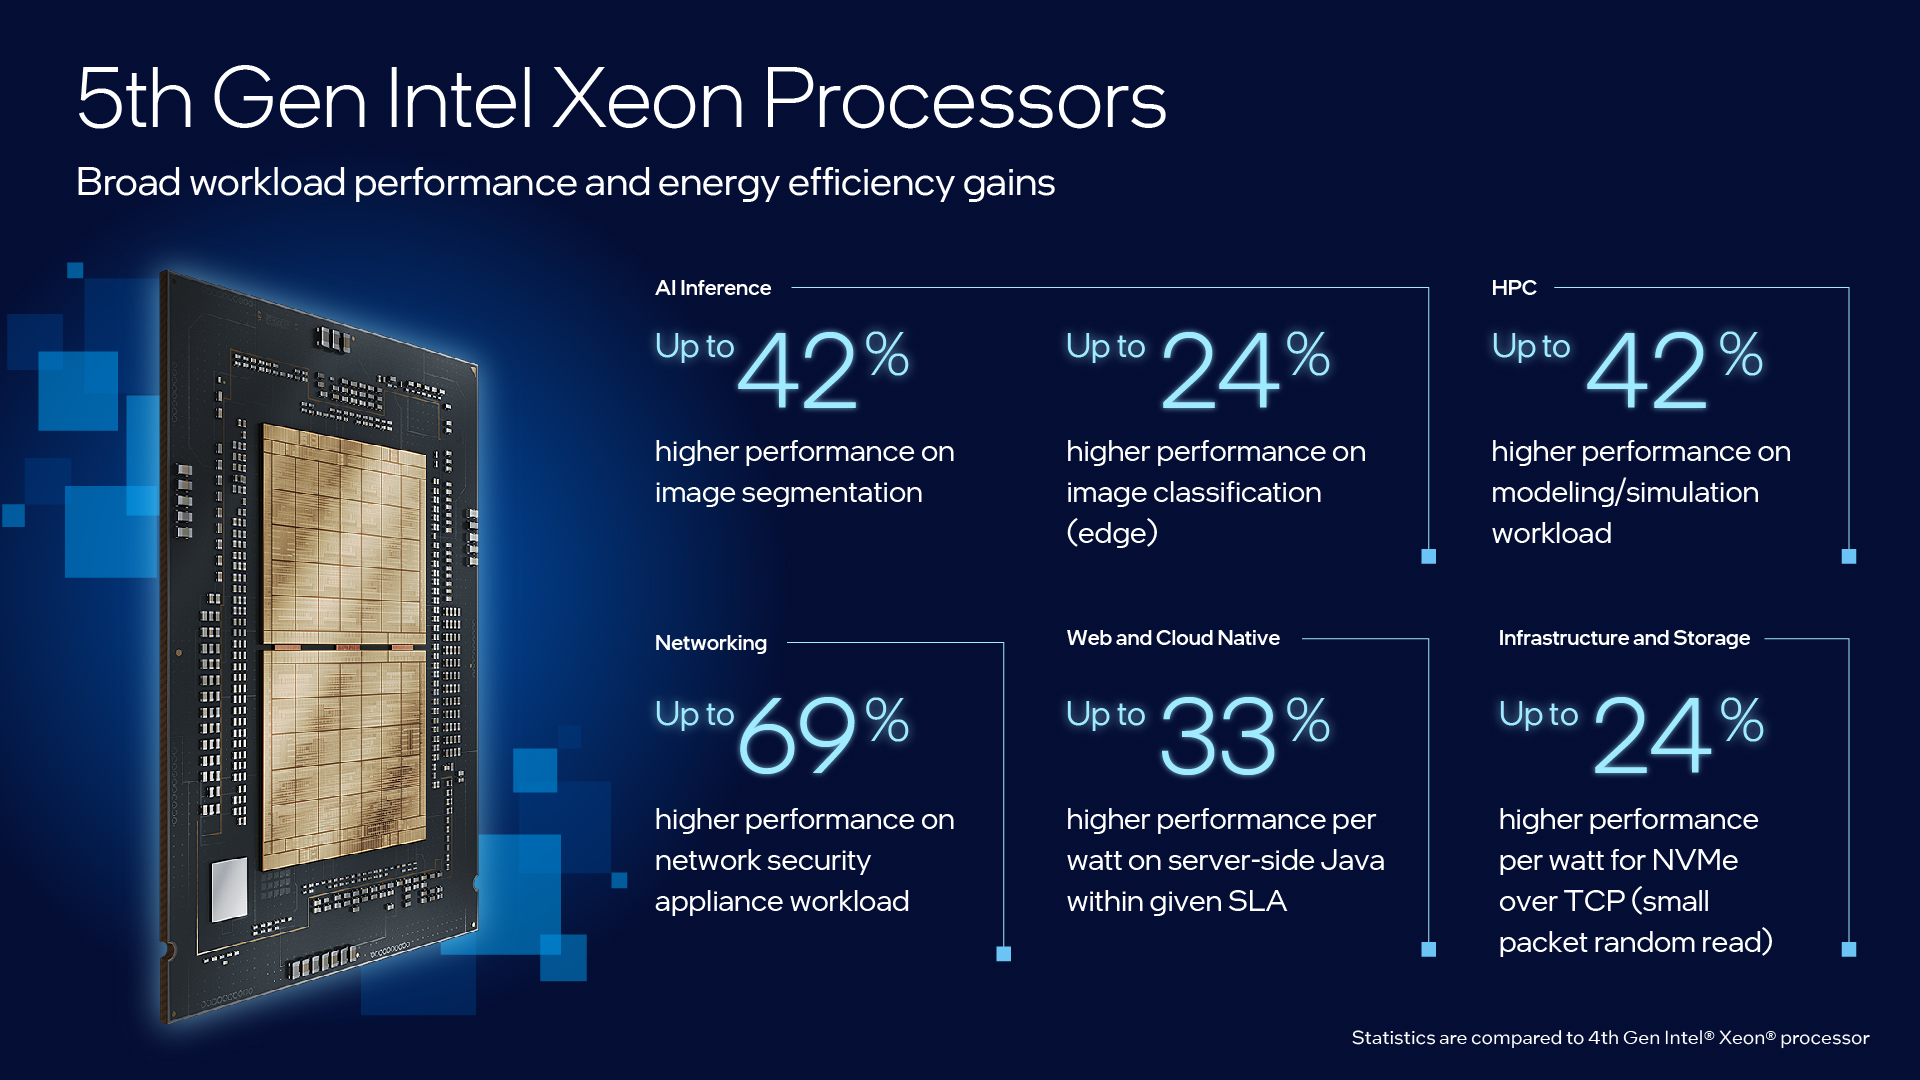 New 5th Gen Intel Xeon Processors are Built with AI Acceleration in...